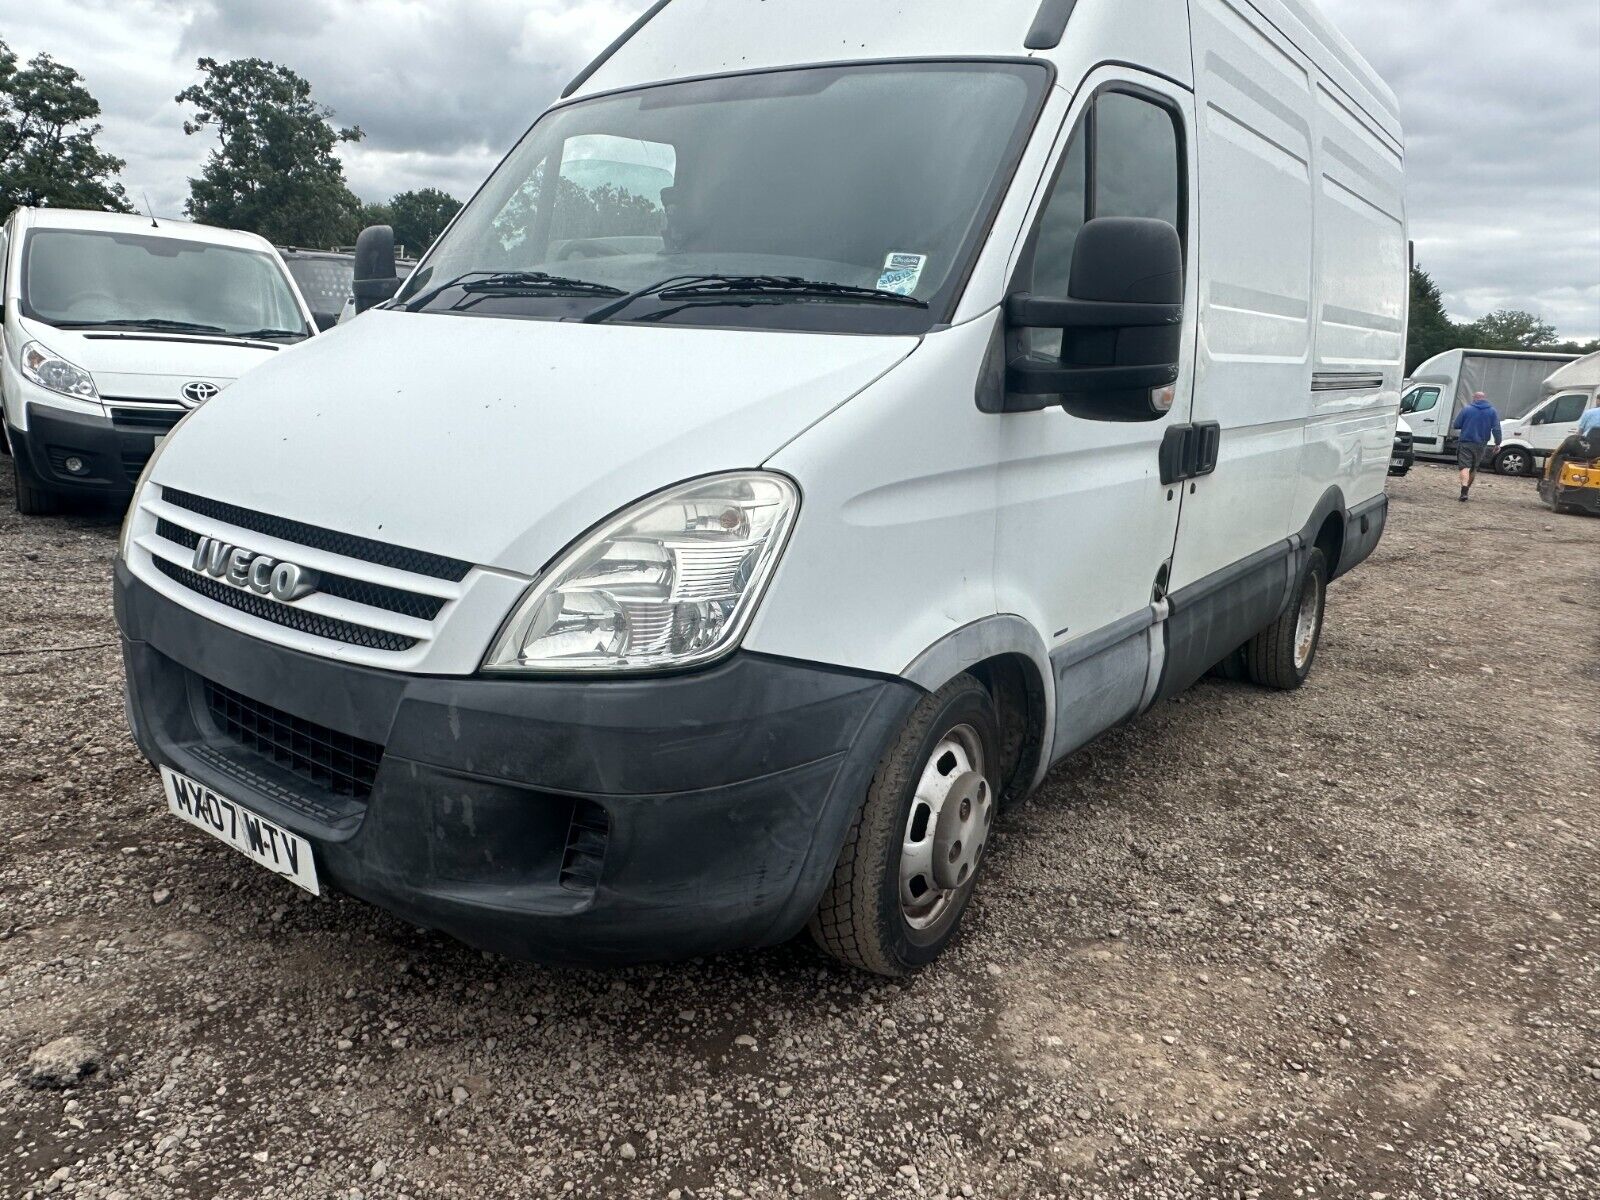 Bid on ONLY 80K MILES - RUGGED & RELIABLE: 2007 IVECO DAILY - PART SERVICE HISTORY (NO VAT ON HAMMER)- Buy &amp; Sell on Auction with EAMA Group